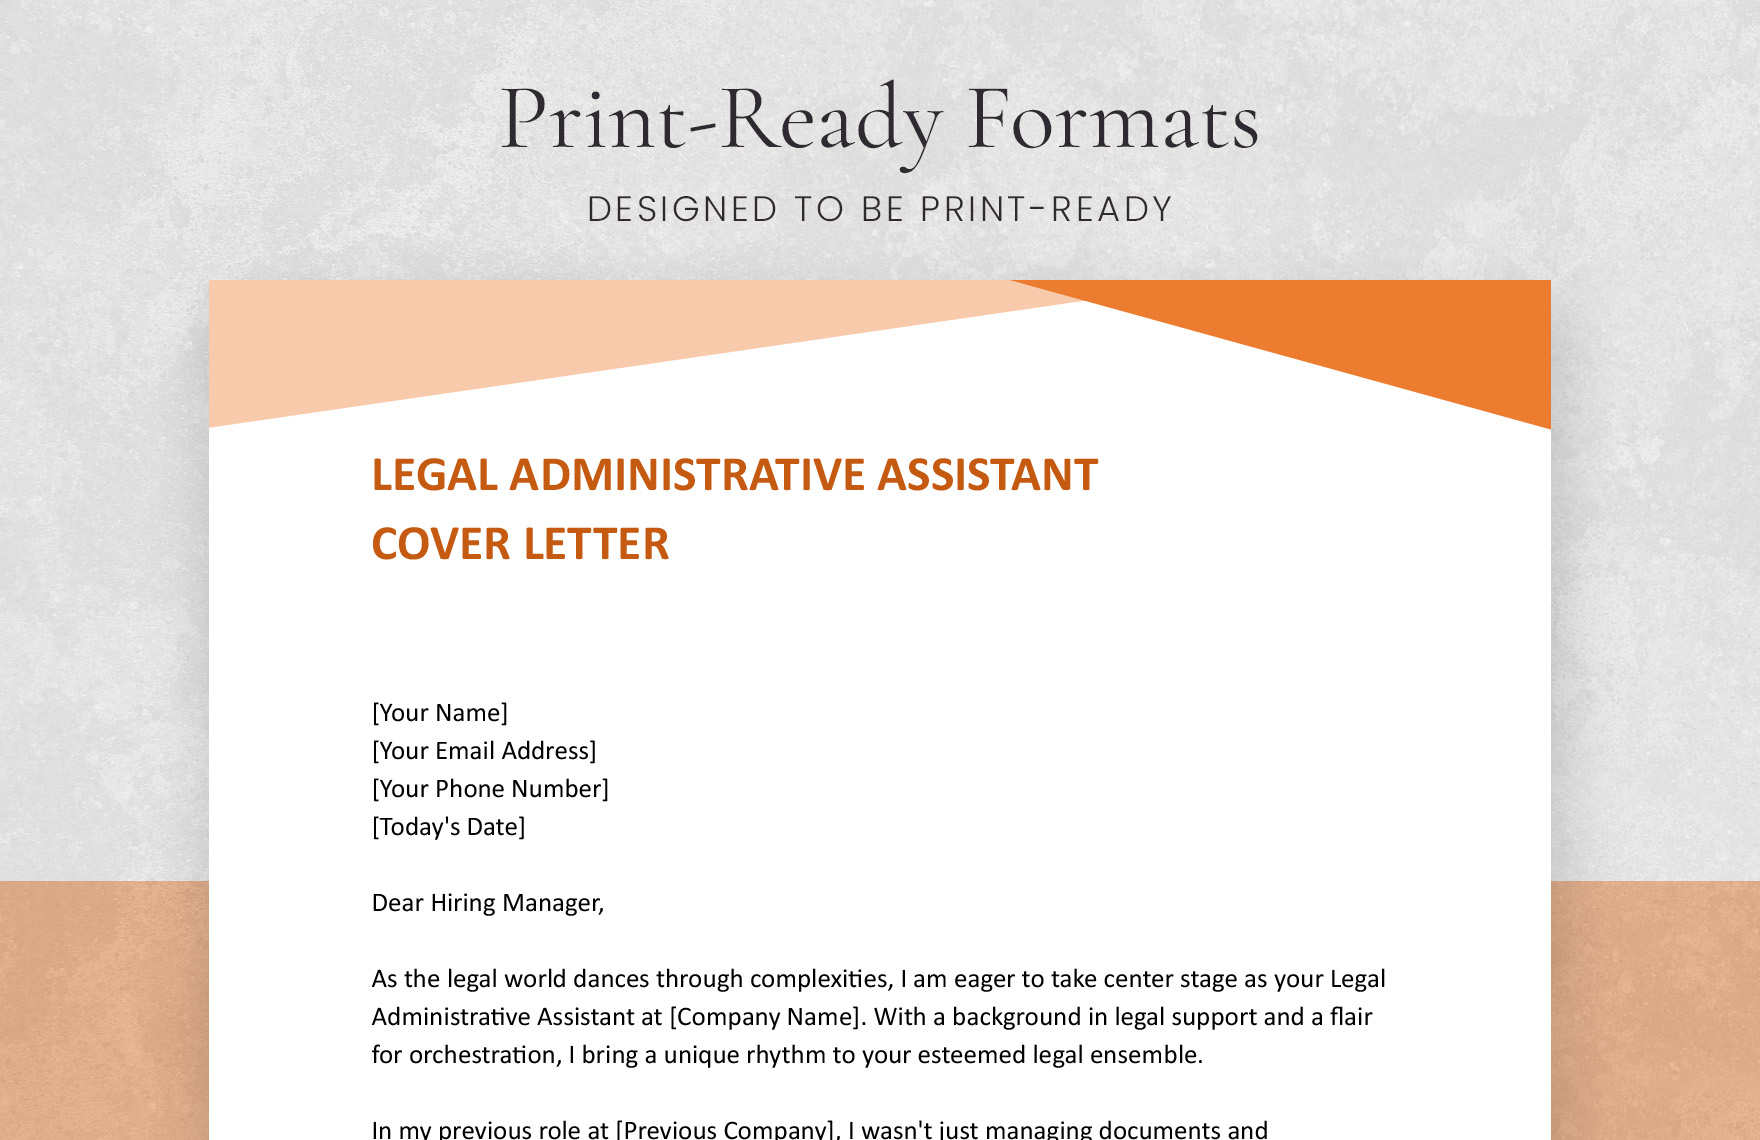 Legal Administrative Assistant Cover Letter